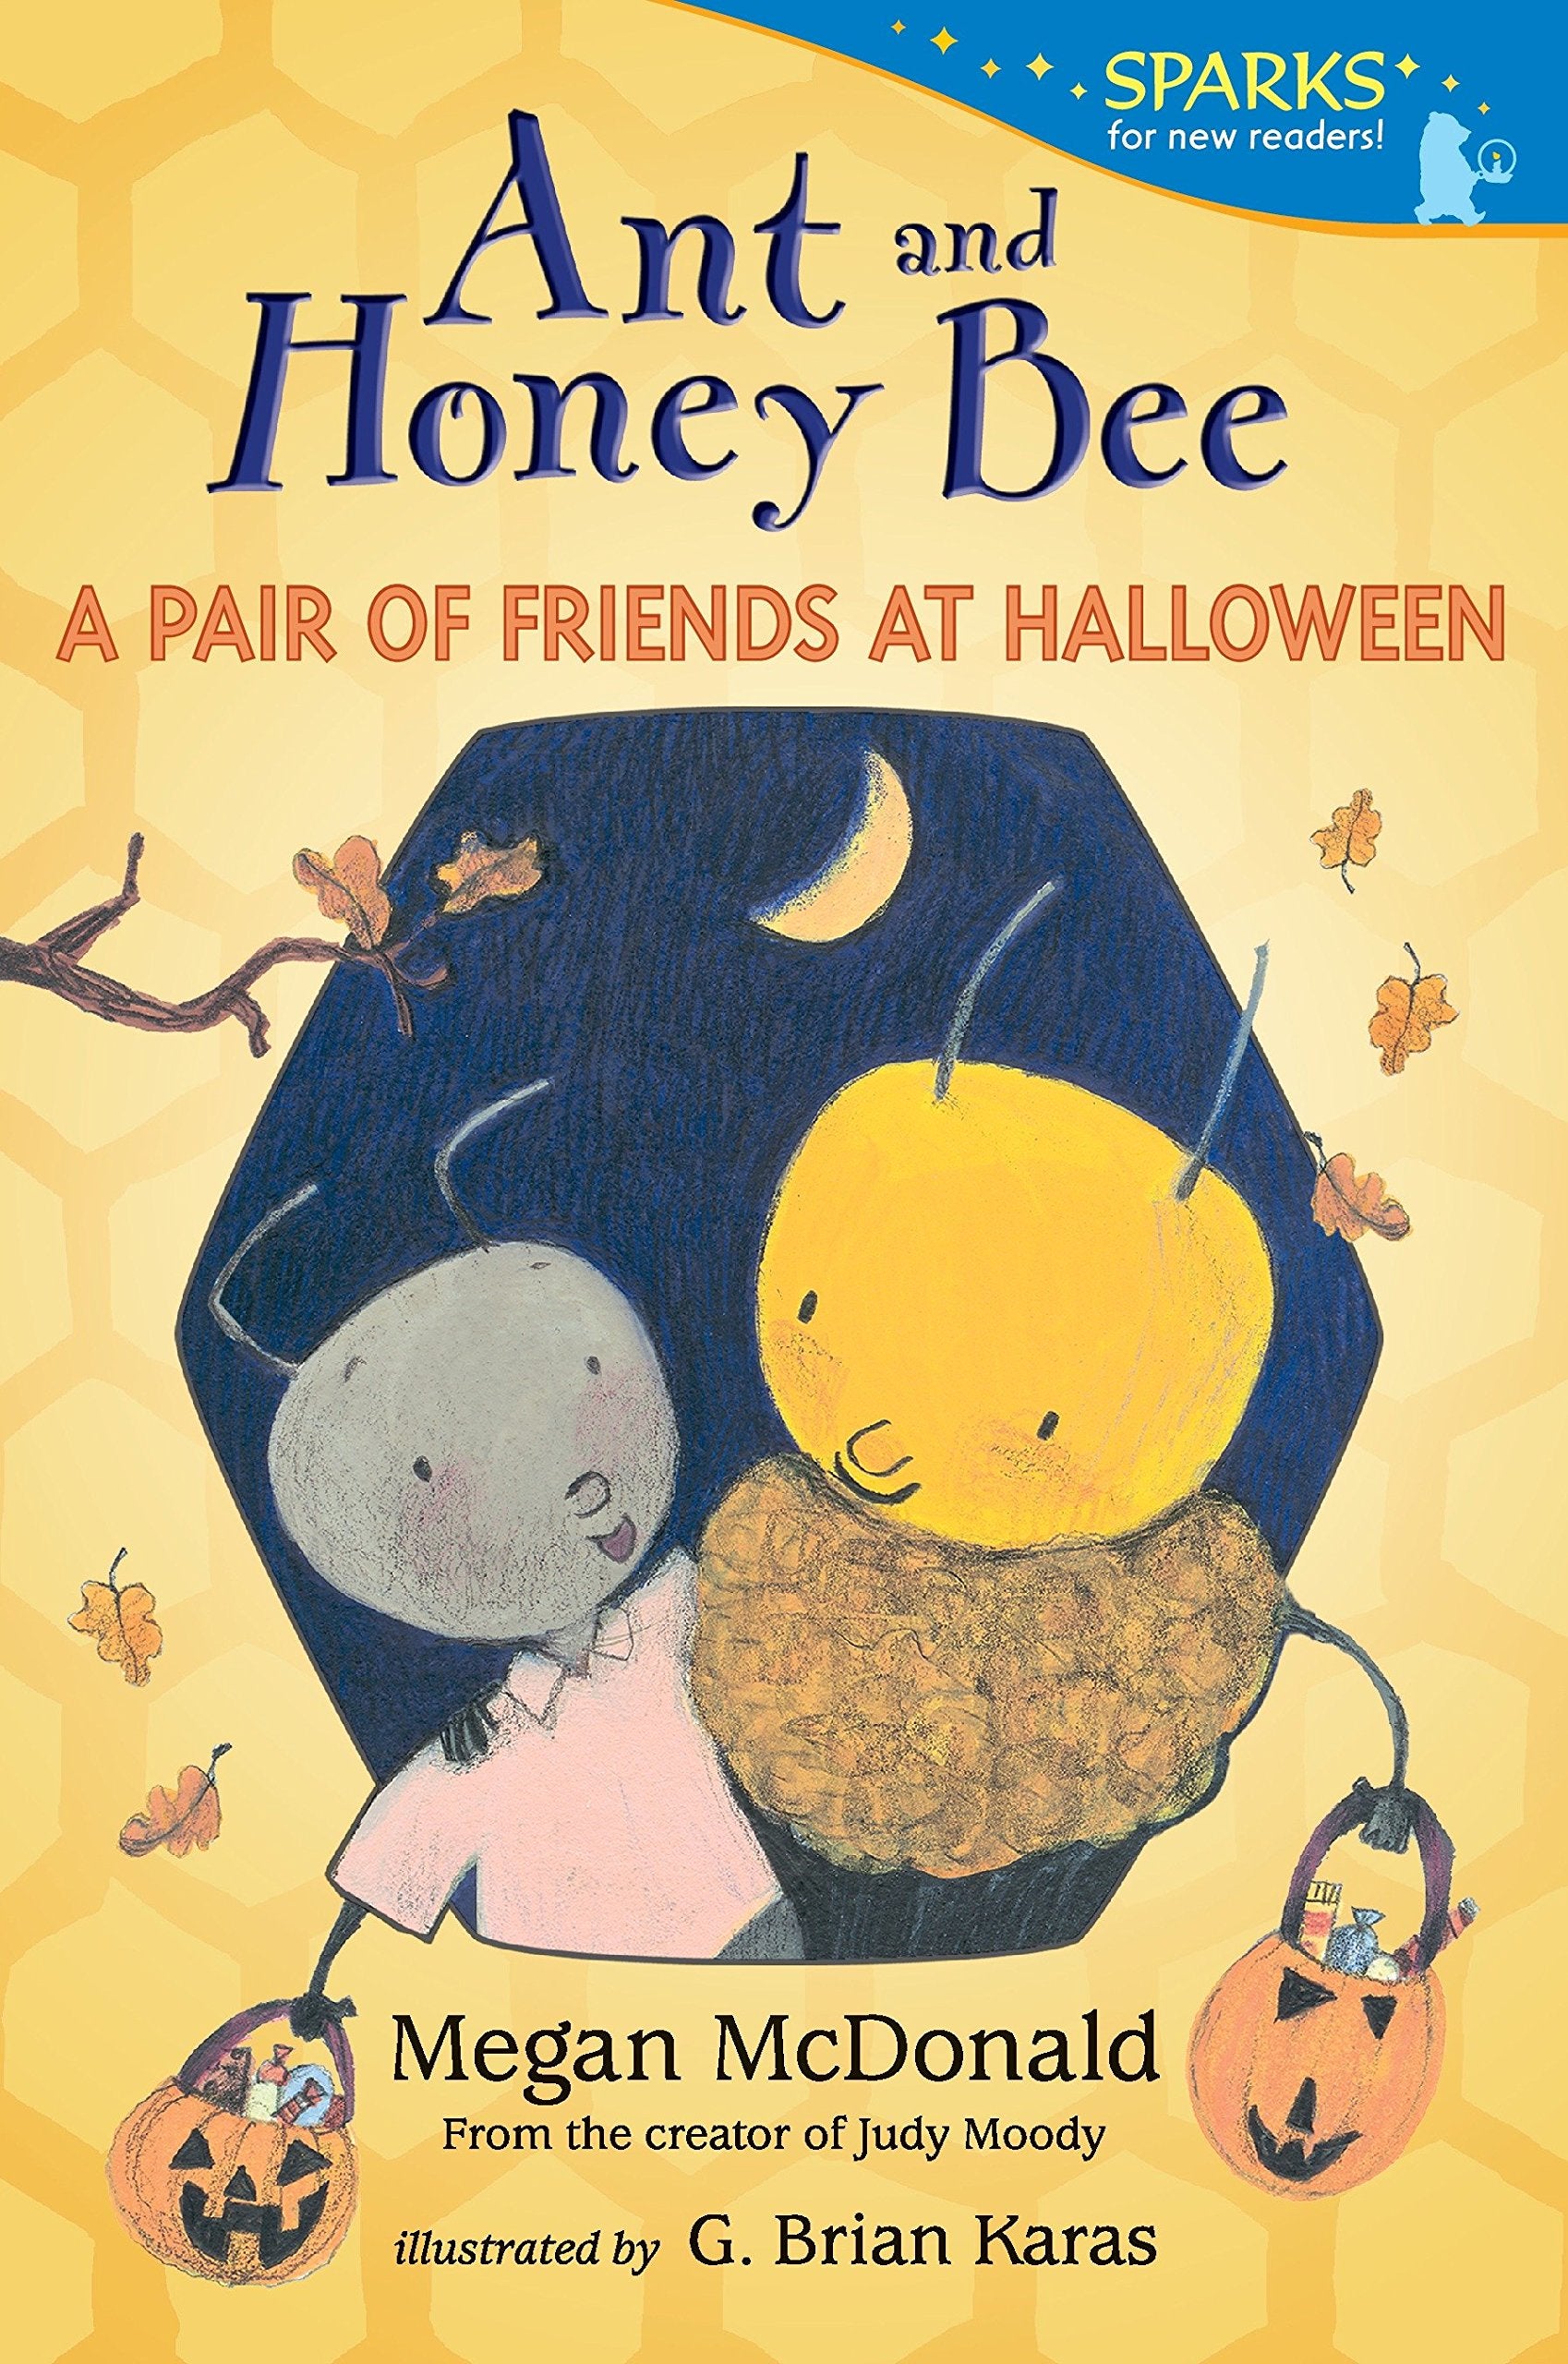 Ant And Honey Bee - A pair of friends at halloween - Sparks for new readers